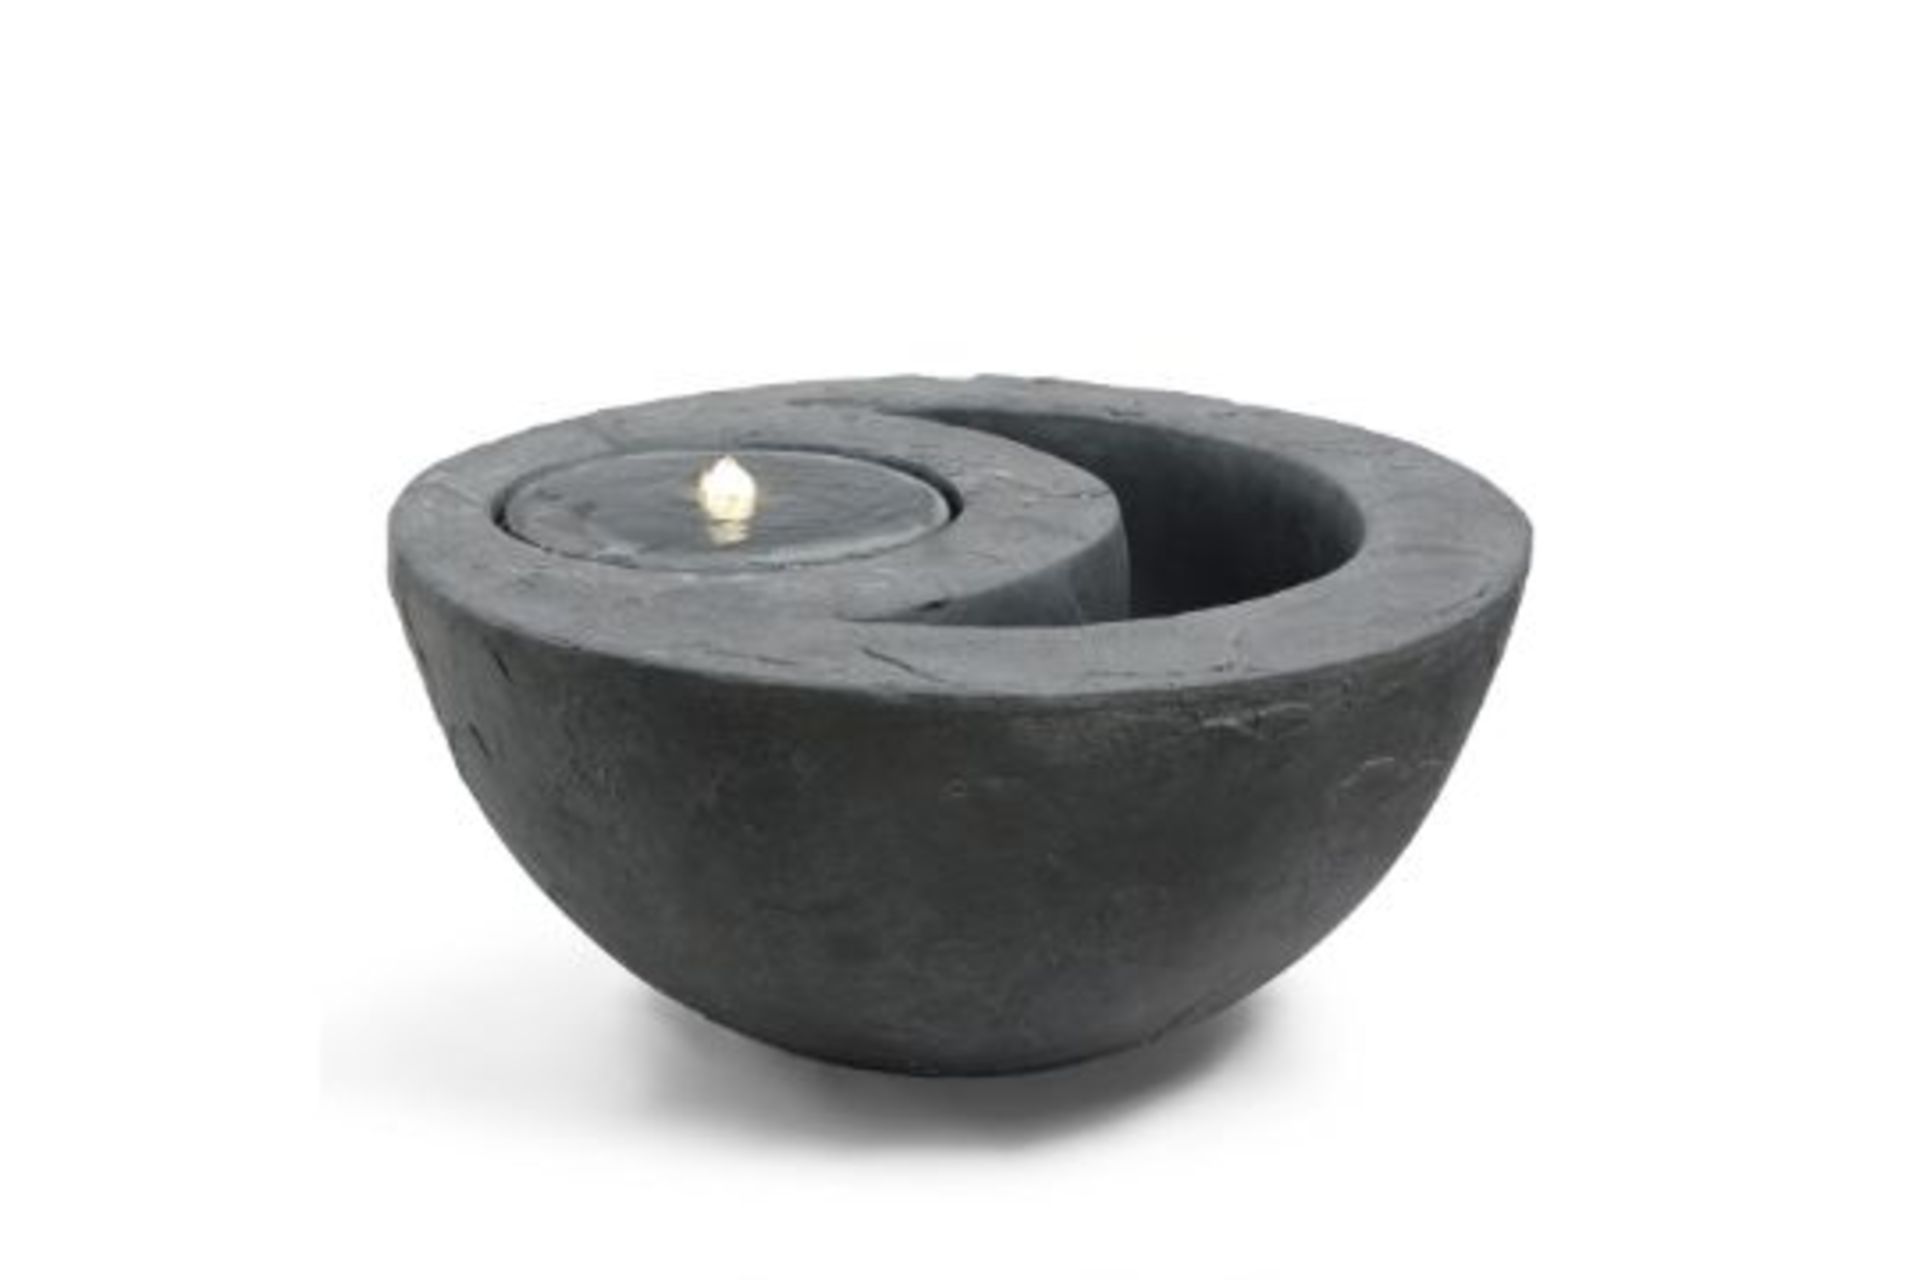 New & Boxed Dual Water Feature and Planter - Garden Bowl Design Planter, Indoor/Outdoor LED Lights - Image 2 of 6